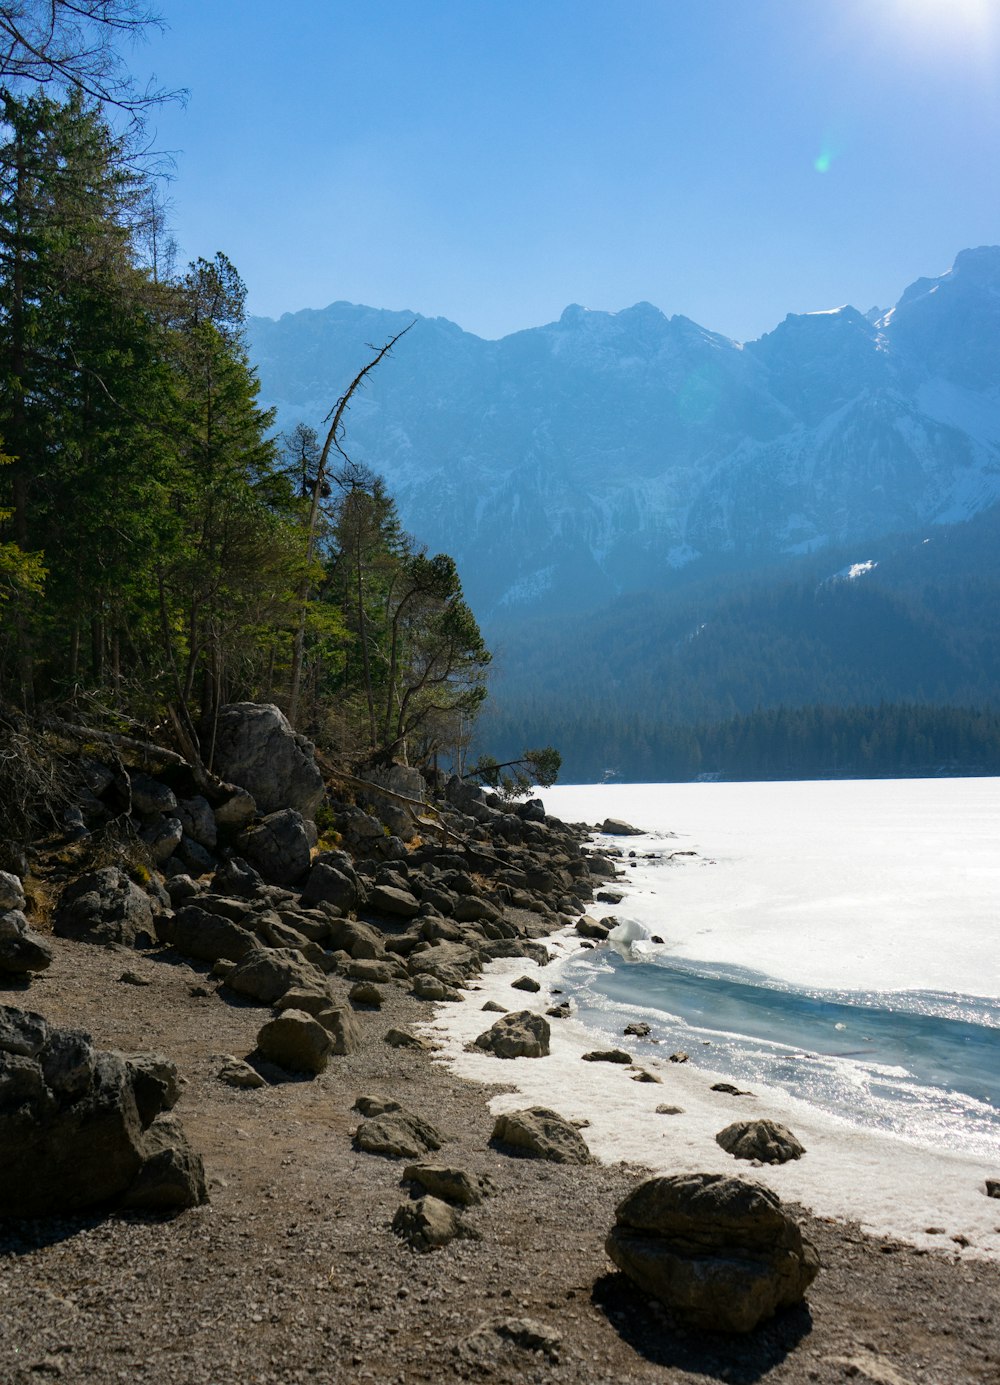 a rocky beach with trees and mountains in the background